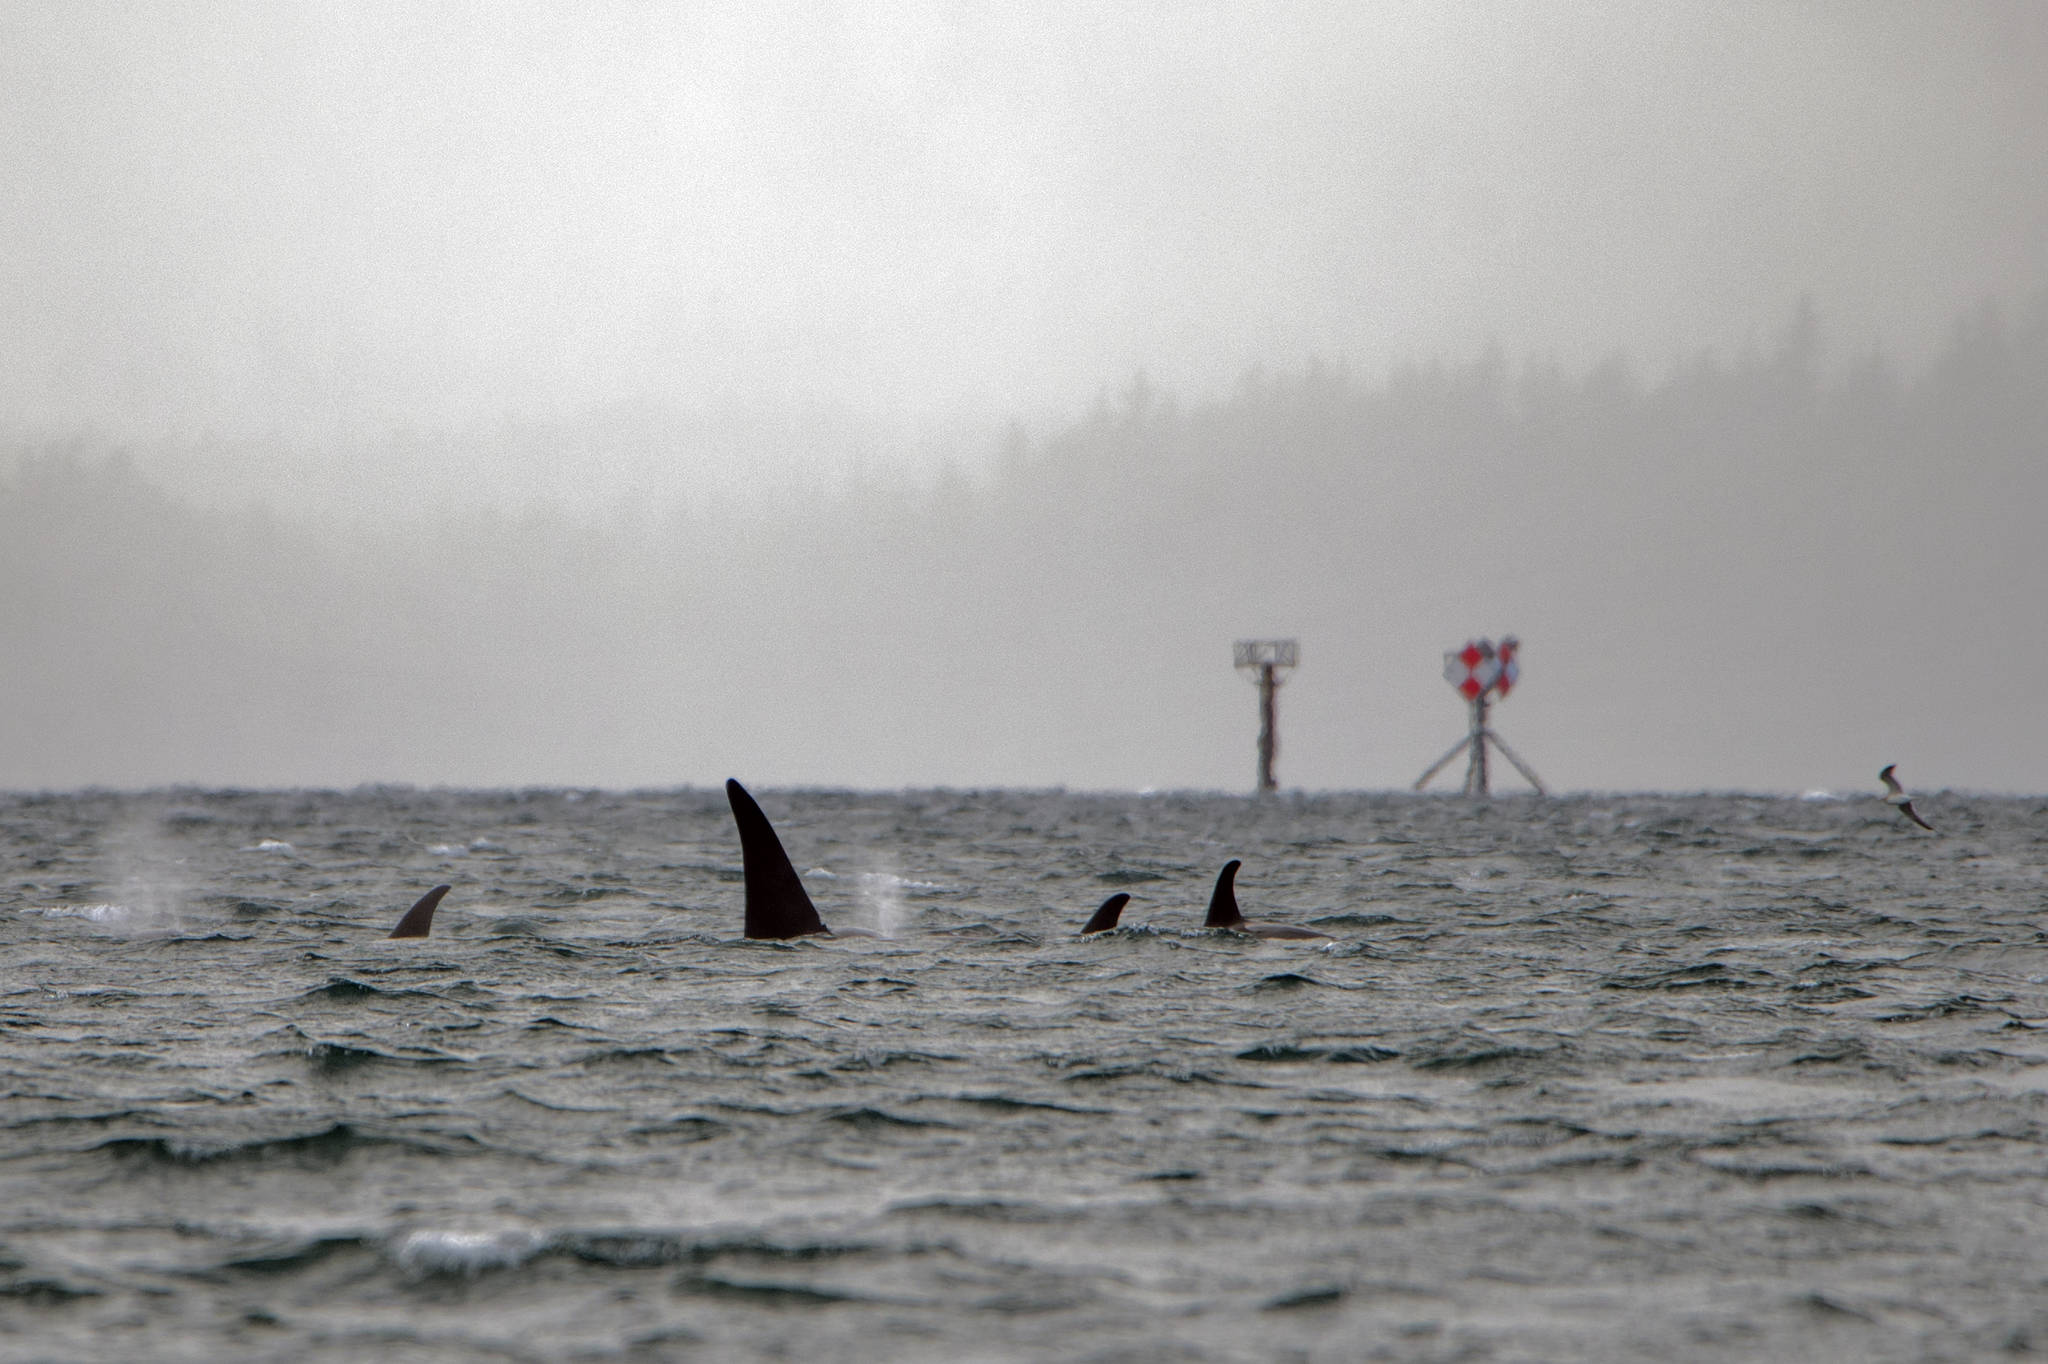 Orcas across from Northern Portland Island. (Courtesy Photo / Kenneth Gill, gillfoto_